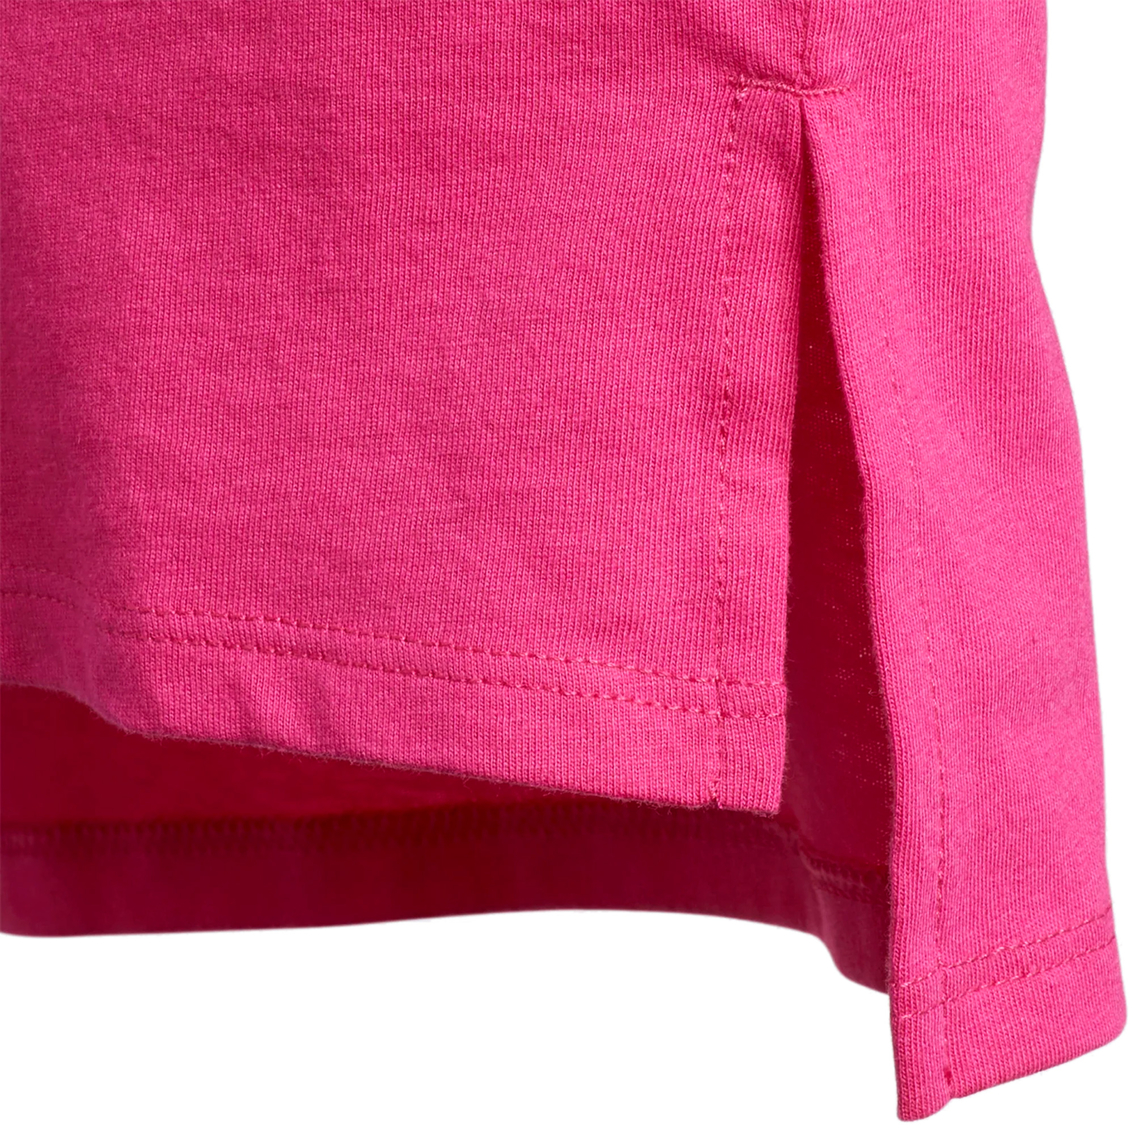 Adidas Little Girls Cropped Tee | Girls 4-6x | Clothing & Accessories ...